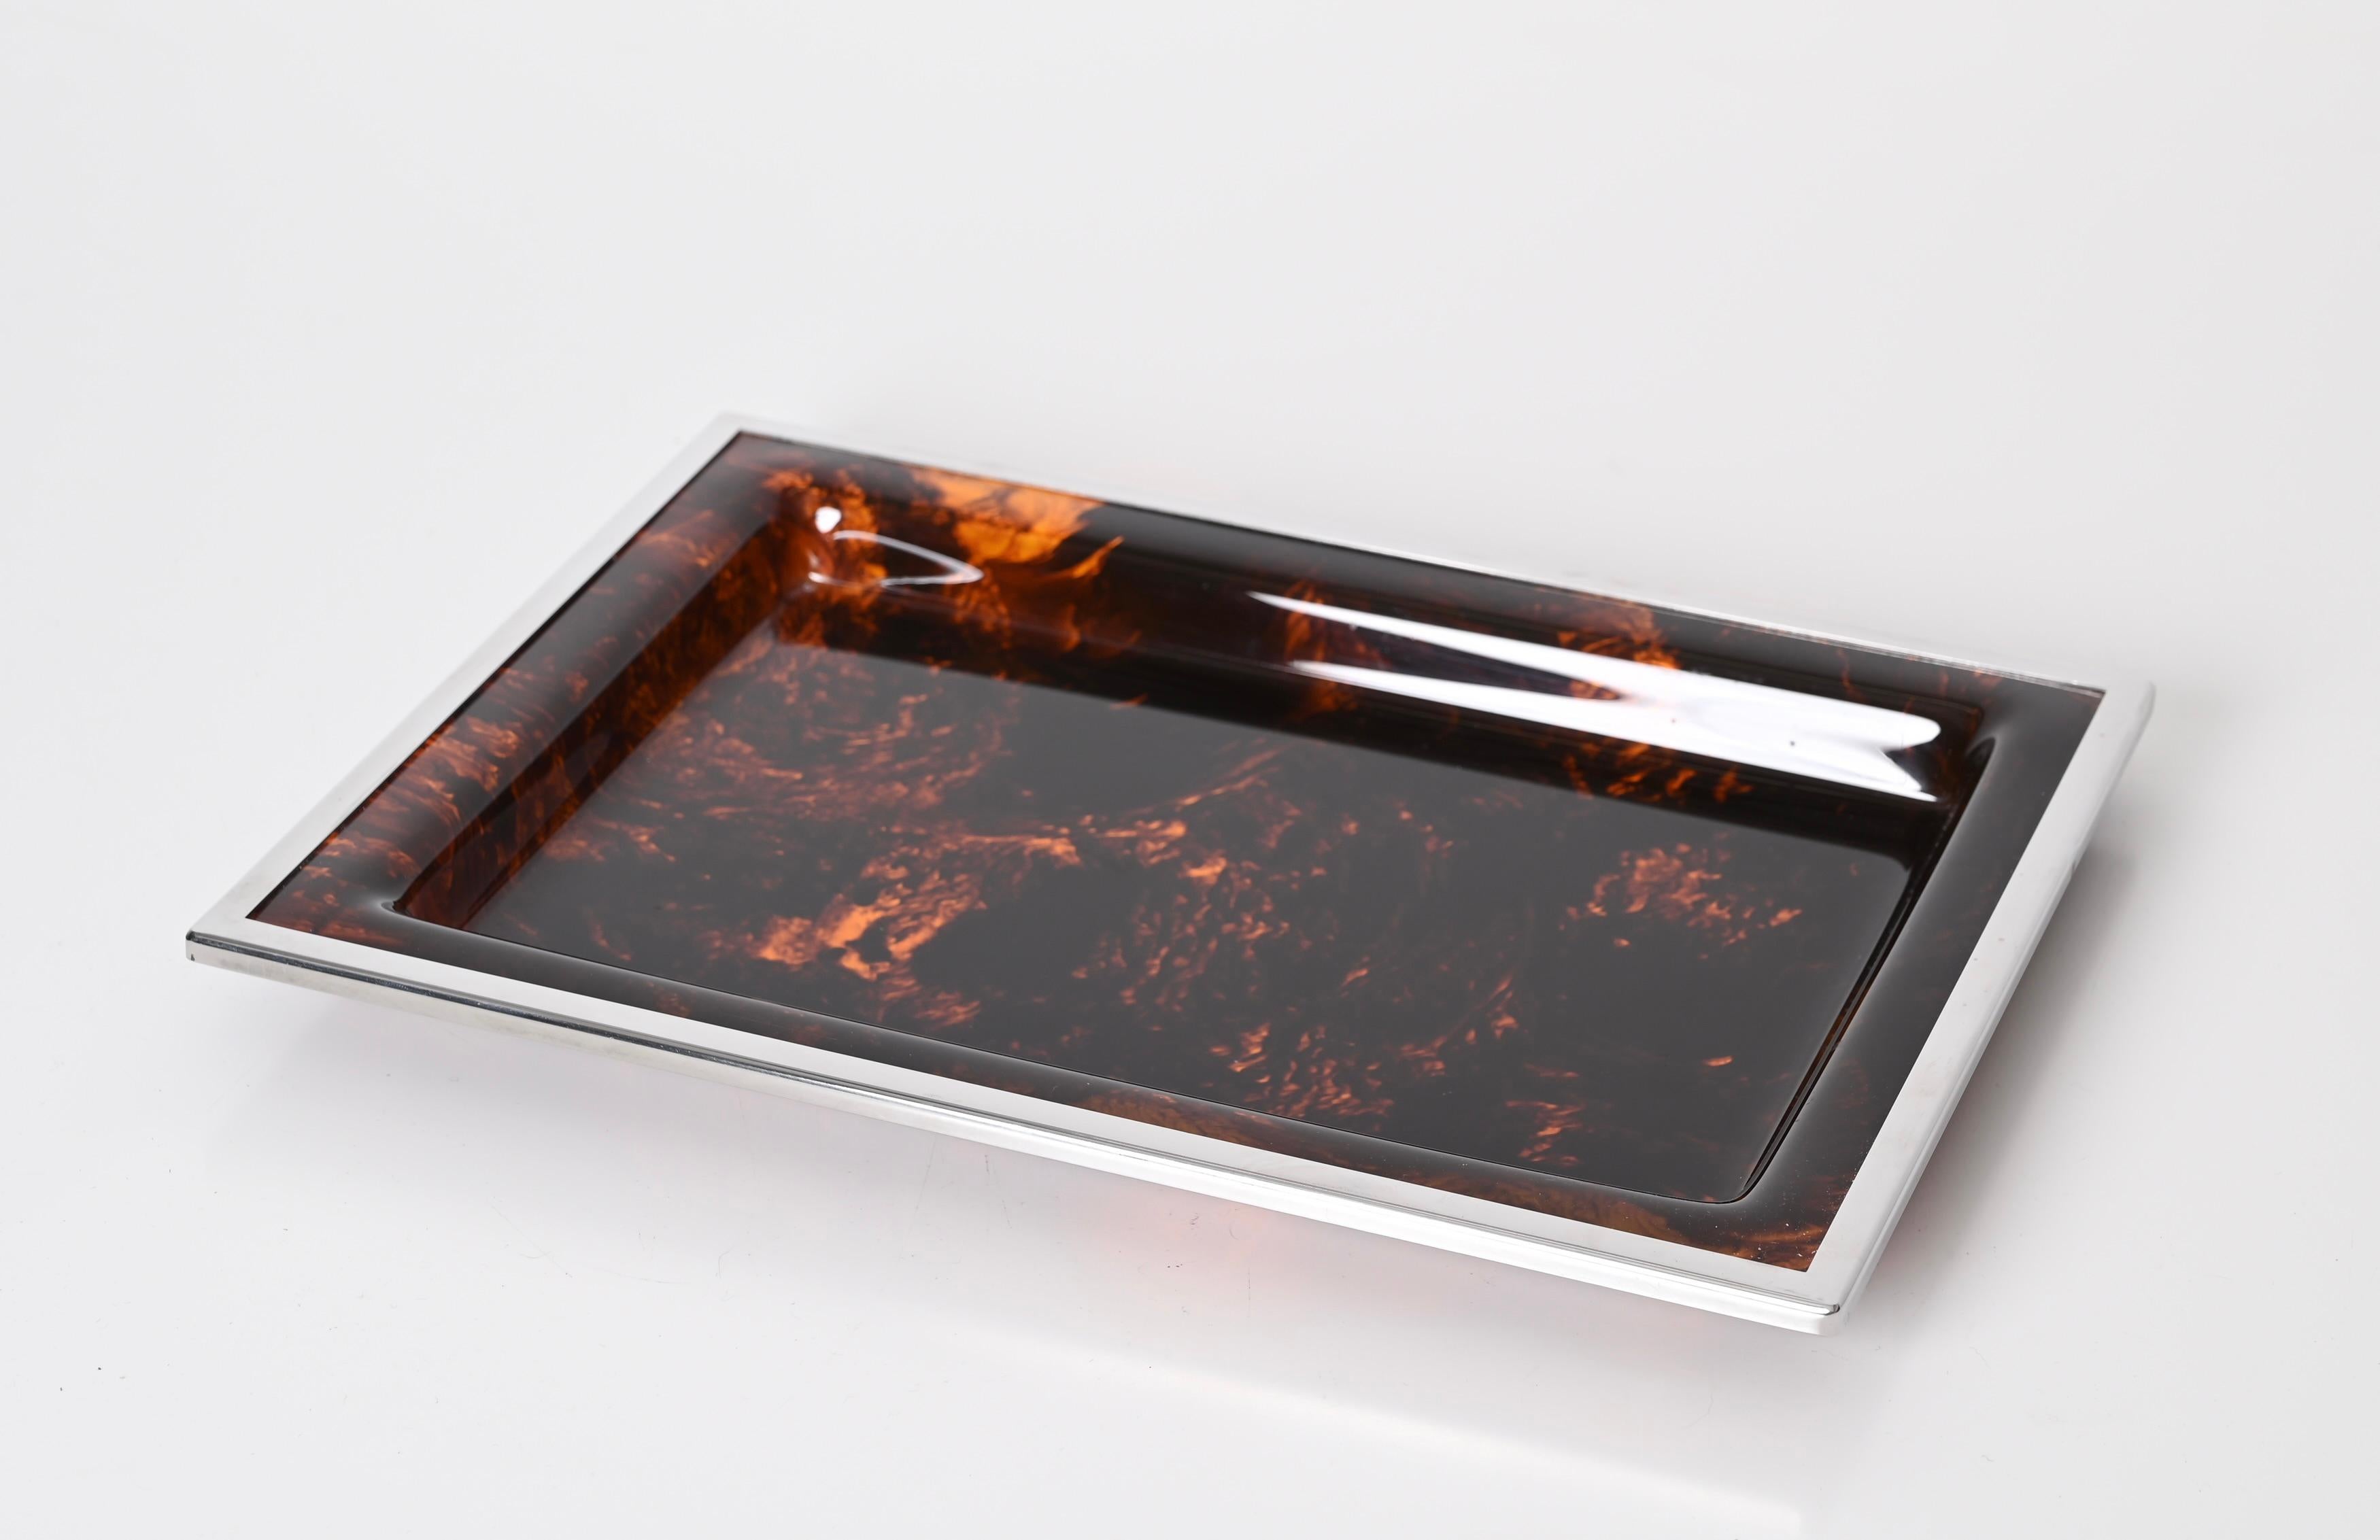 Metal Christian Dior Tortoiseshell Effect Lucite and Chrome Serving Tray, Italy 1970s For Sale